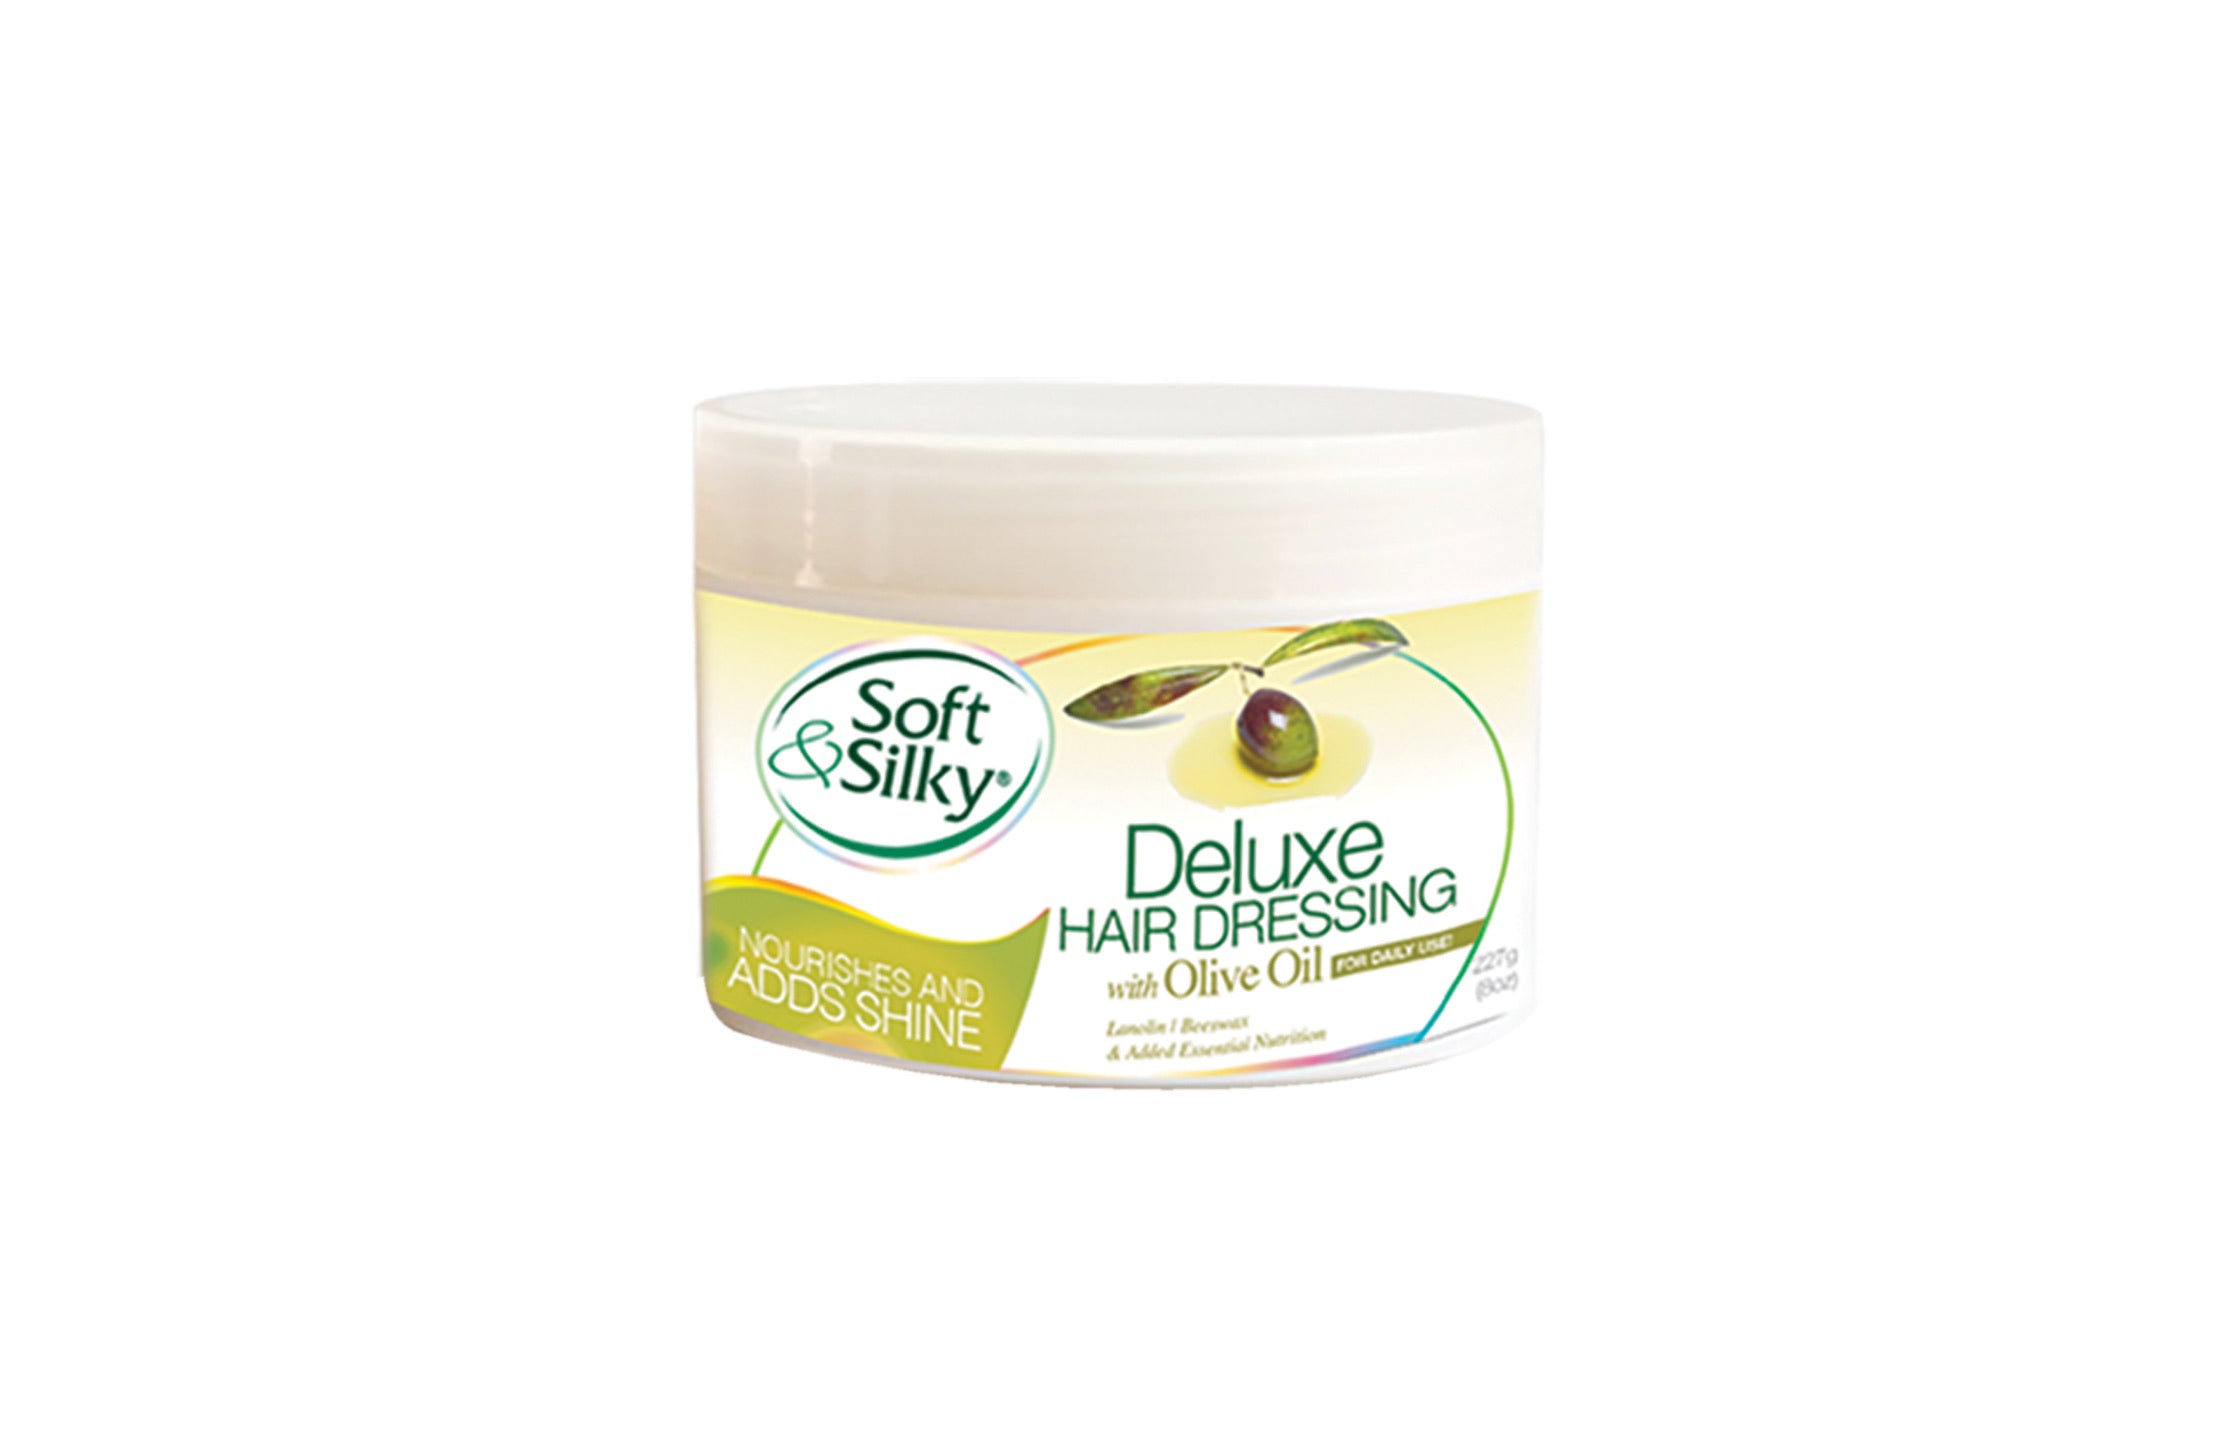 Soft & silky deluxe hair dressing 4.9oz